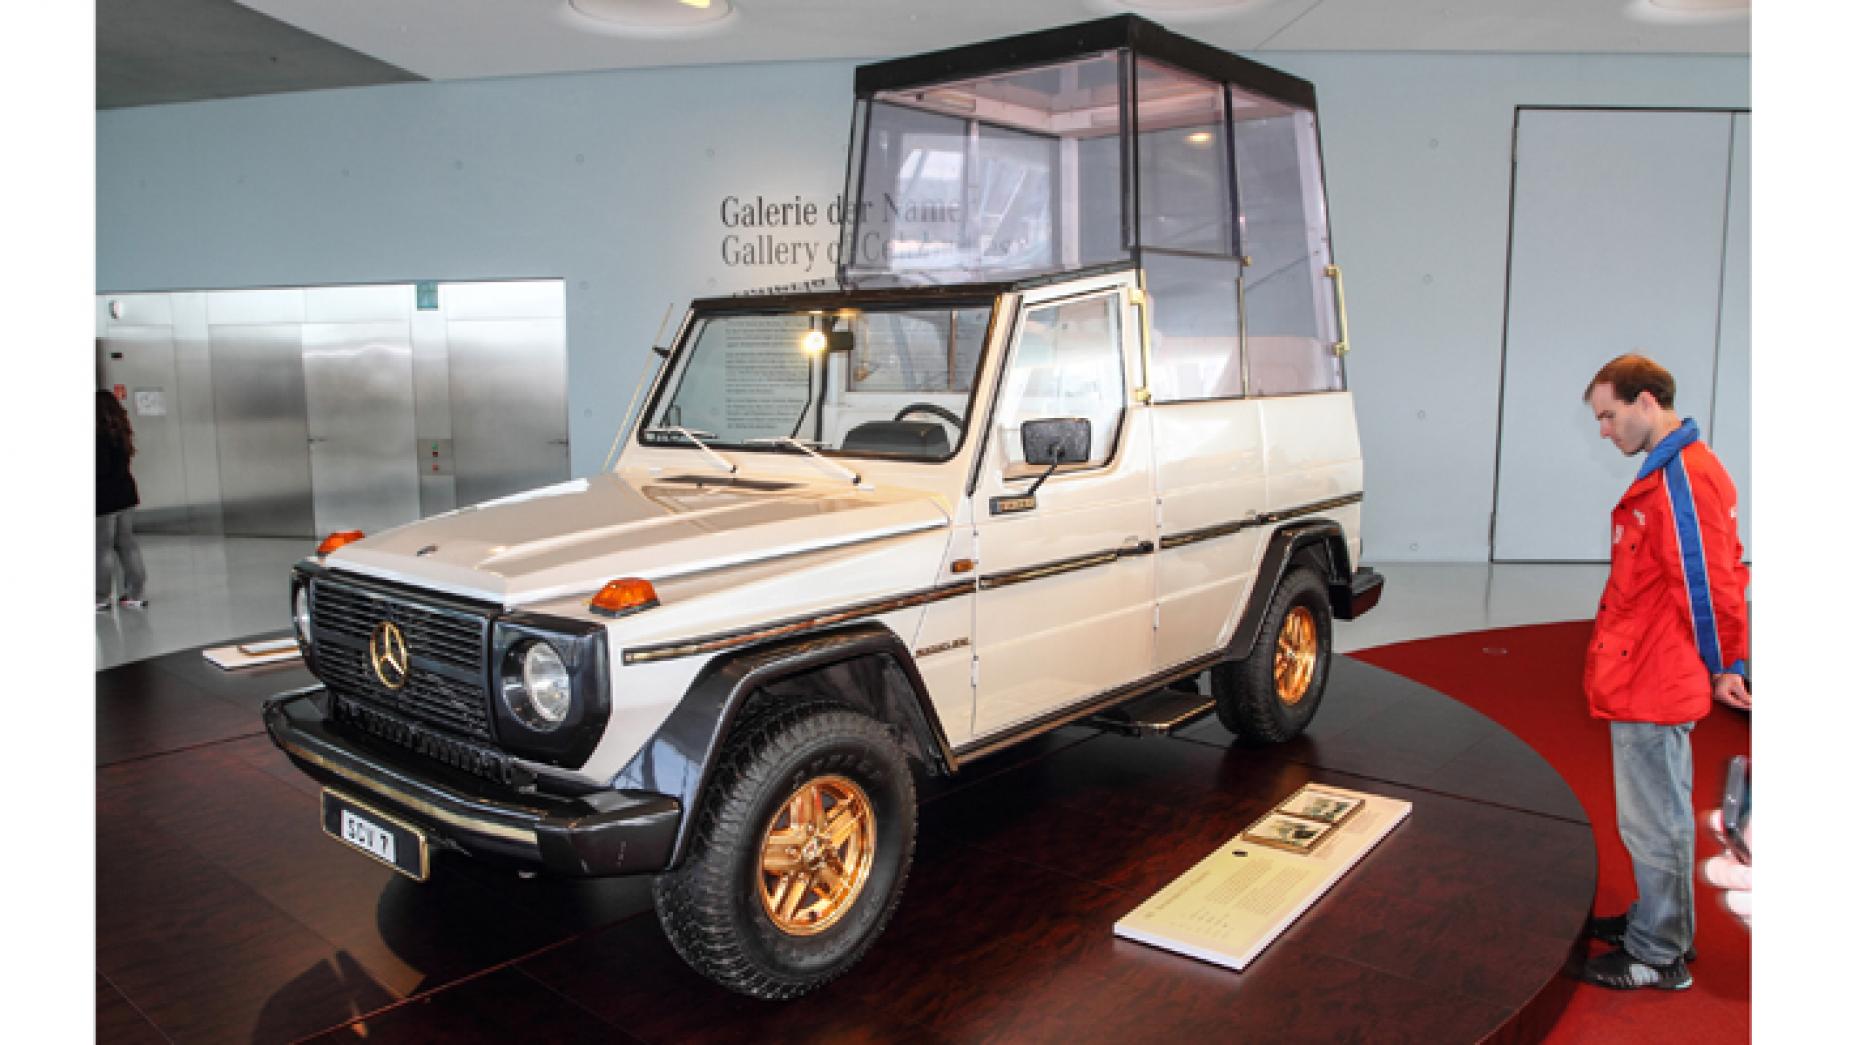 1980 MERCEDES-BENZ 230G: It’s the Popemobile!